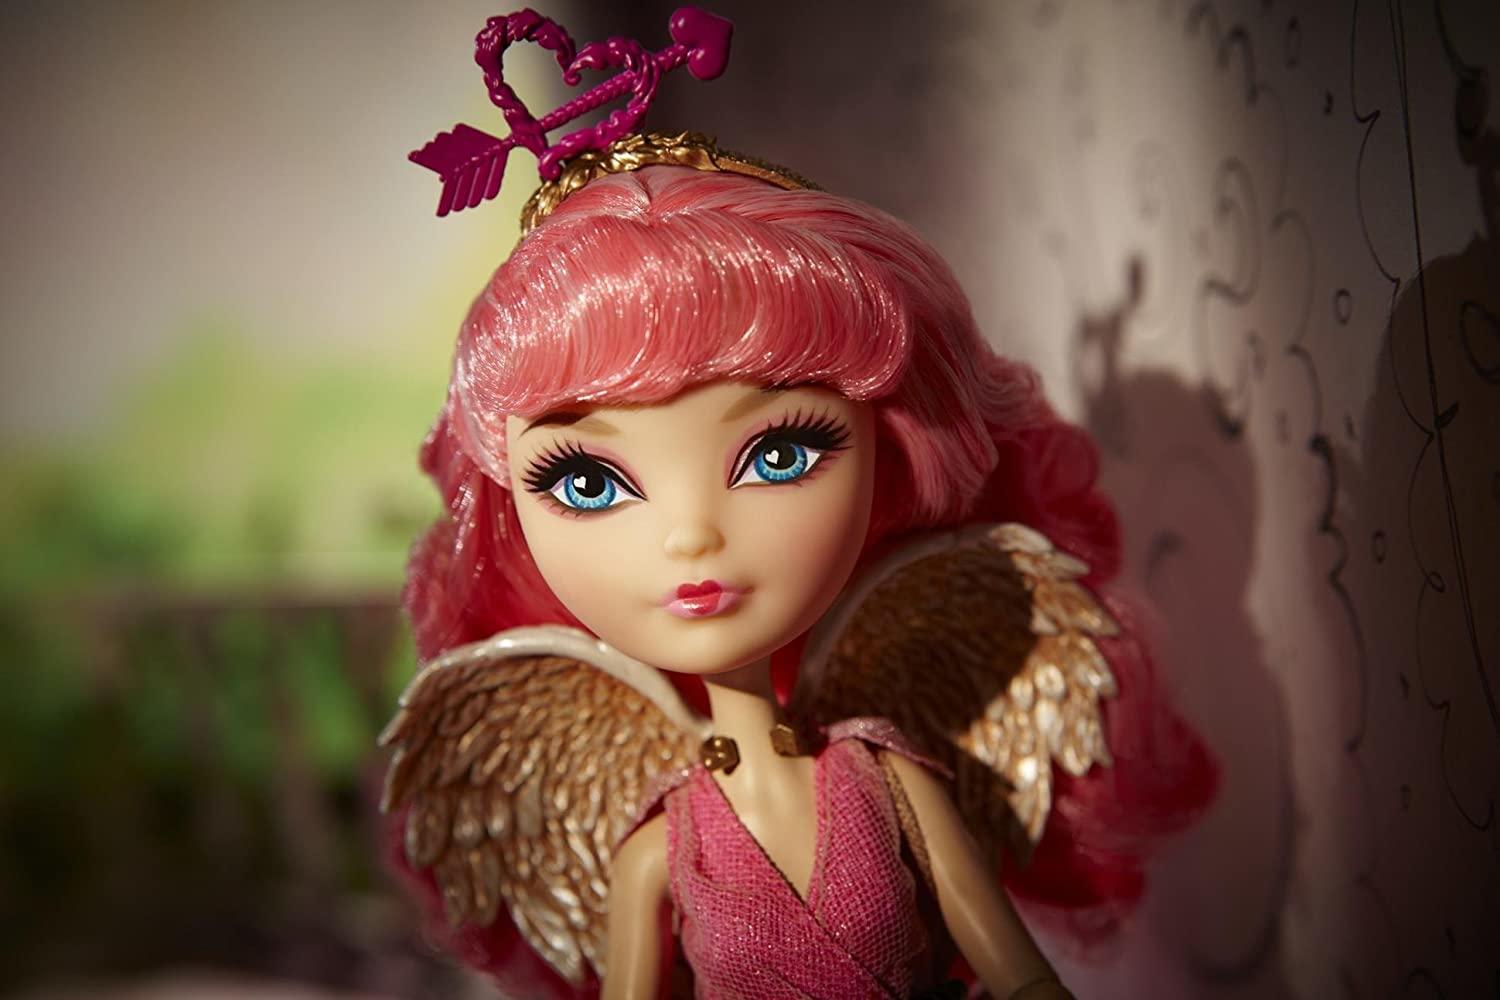 Ever After High C.A. Cupid Doll